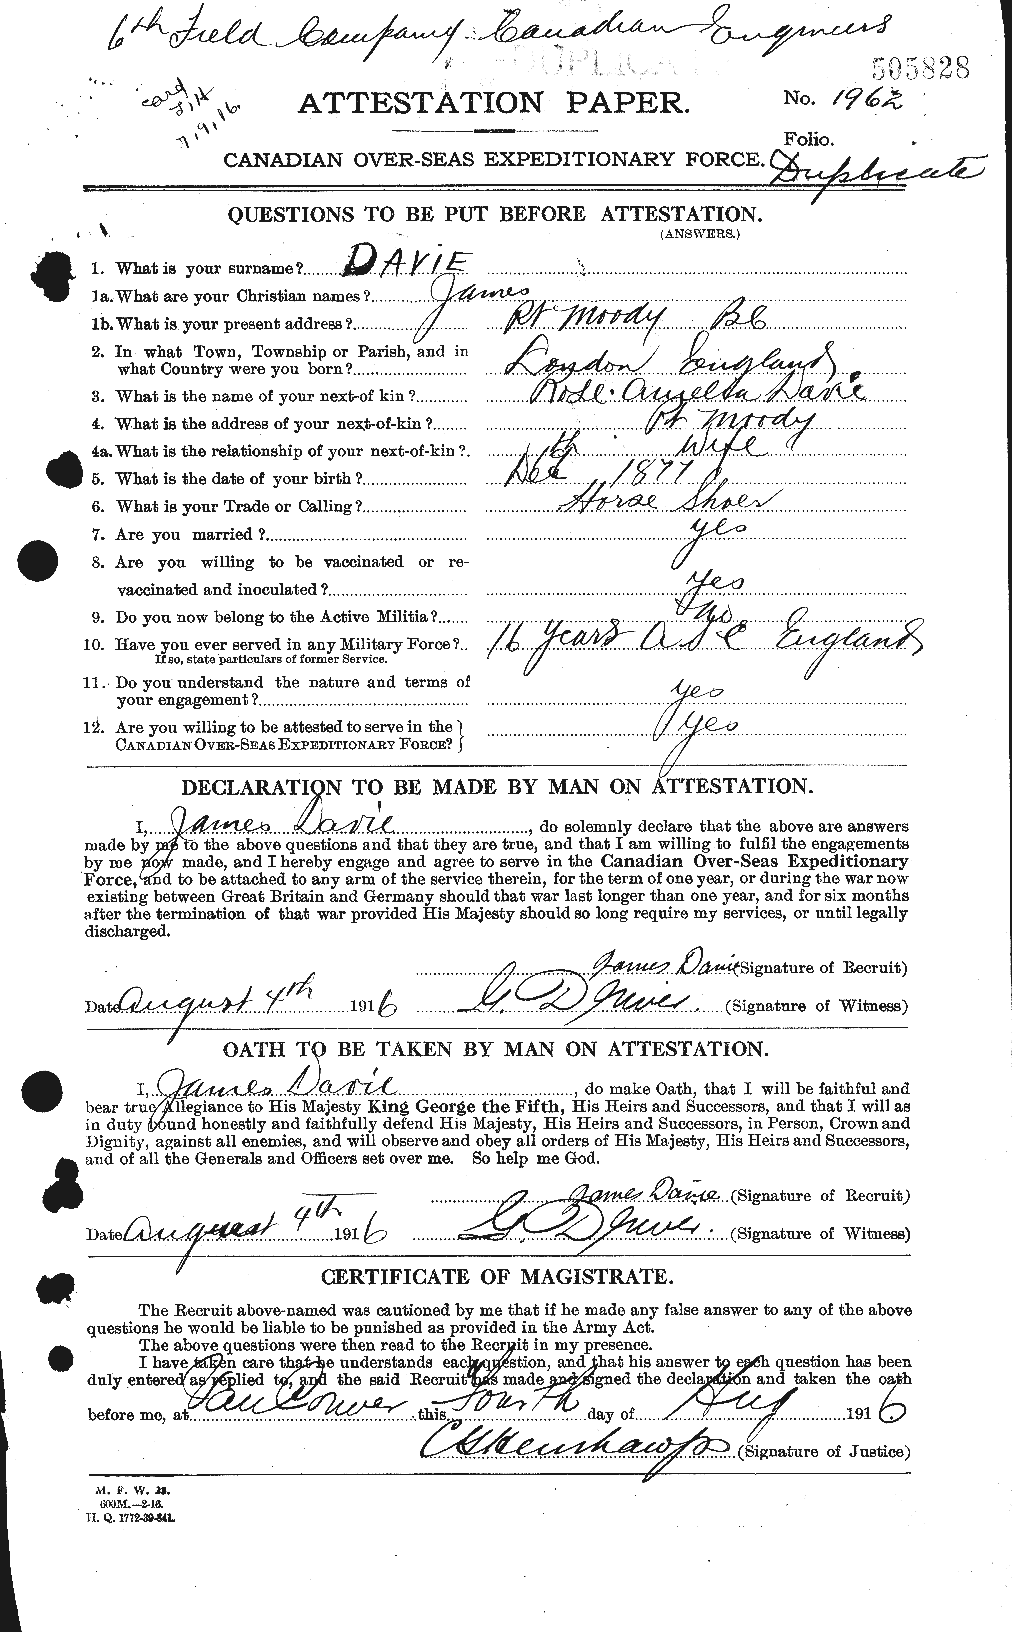 Personnel Records of the First World War - CEF 278827a